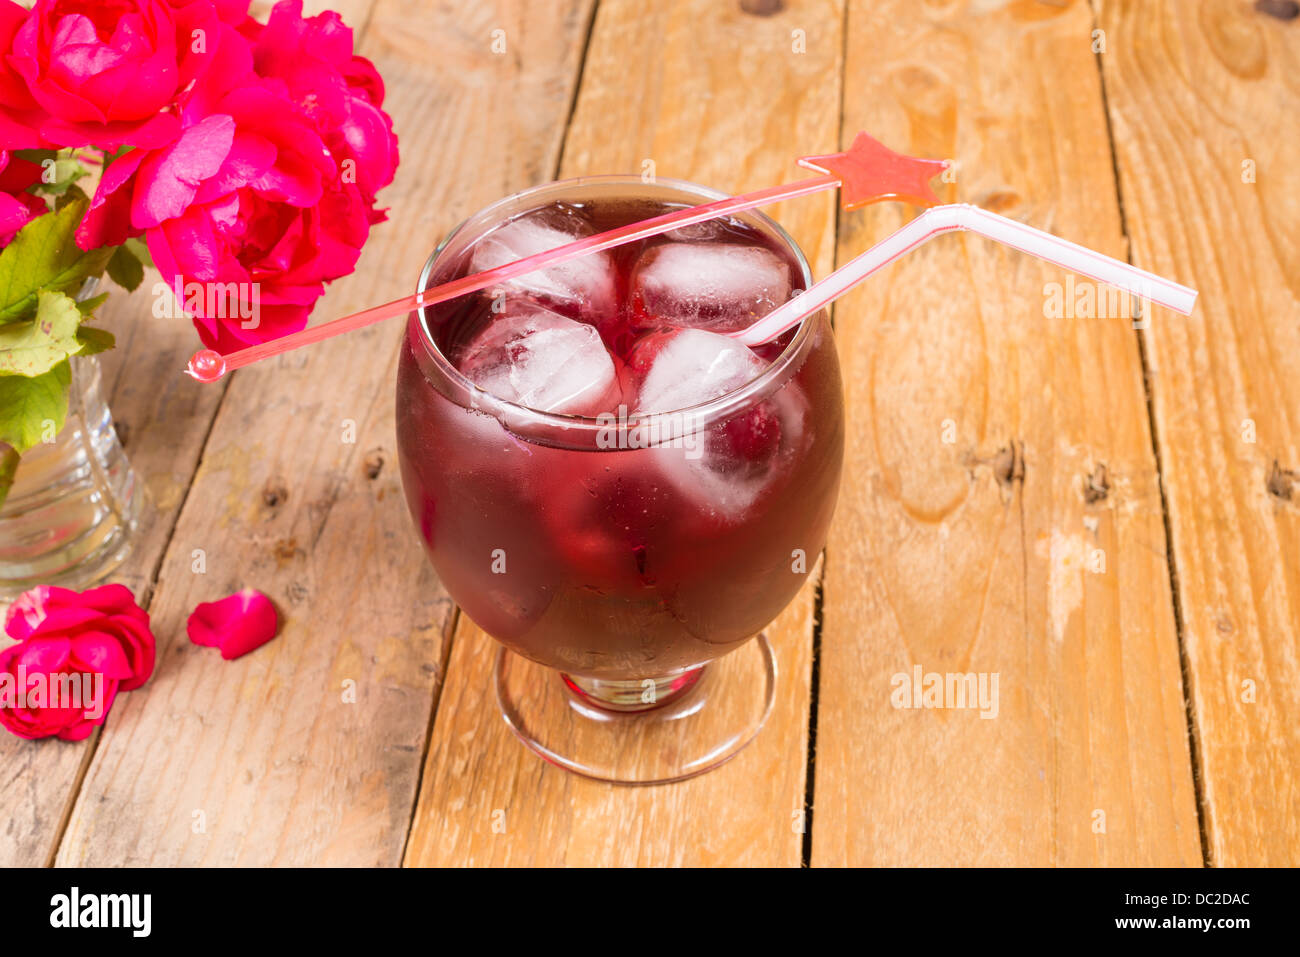 Fruity cocktail based on cherry juice Stock Photo